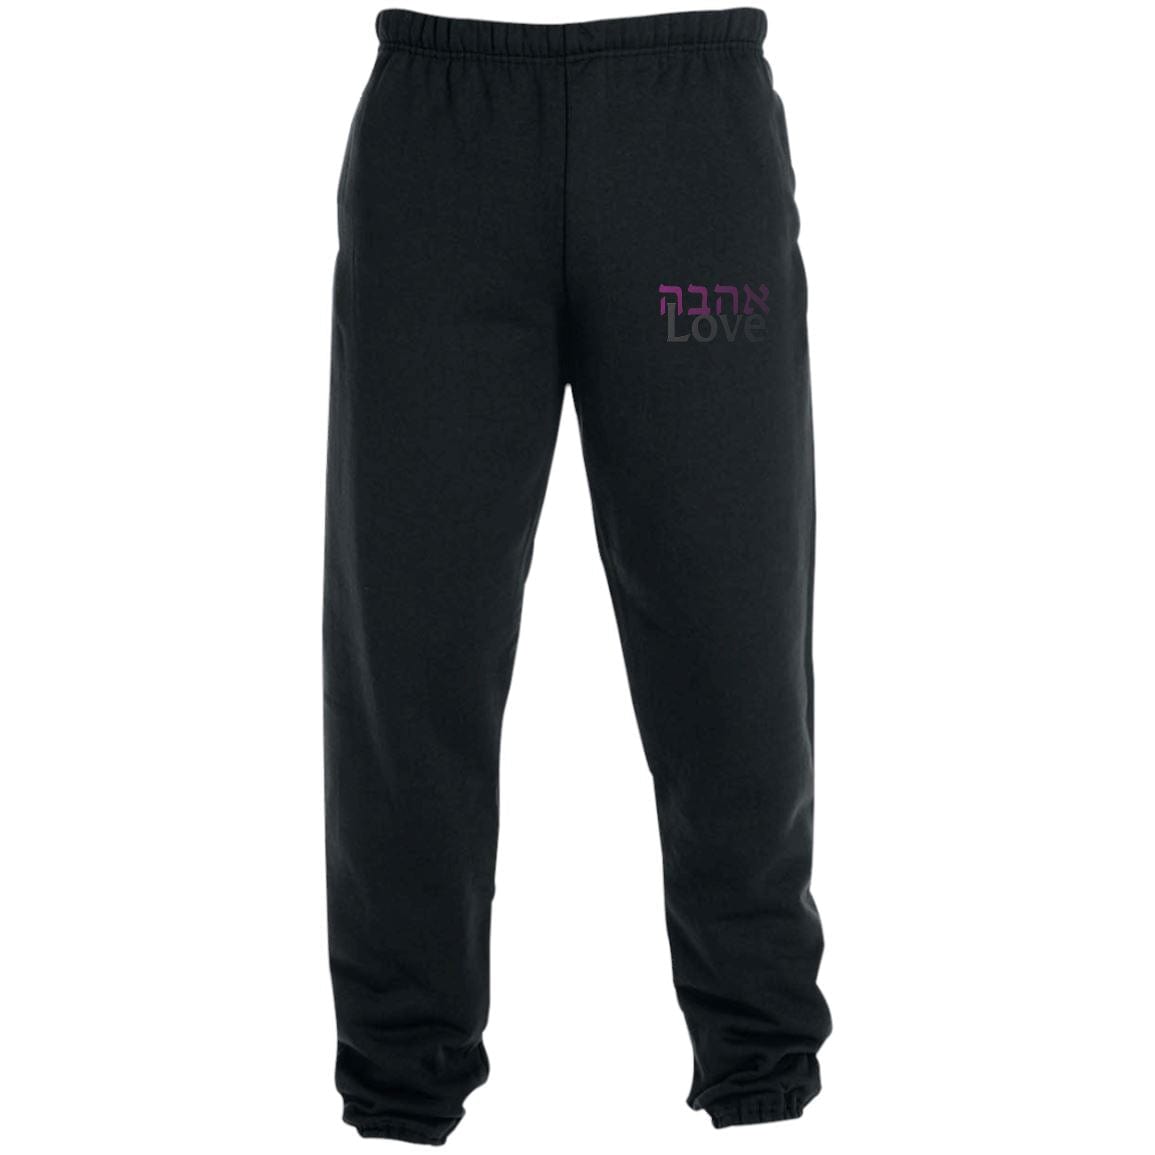 Hebrew Love Sweatpants with Pockets –